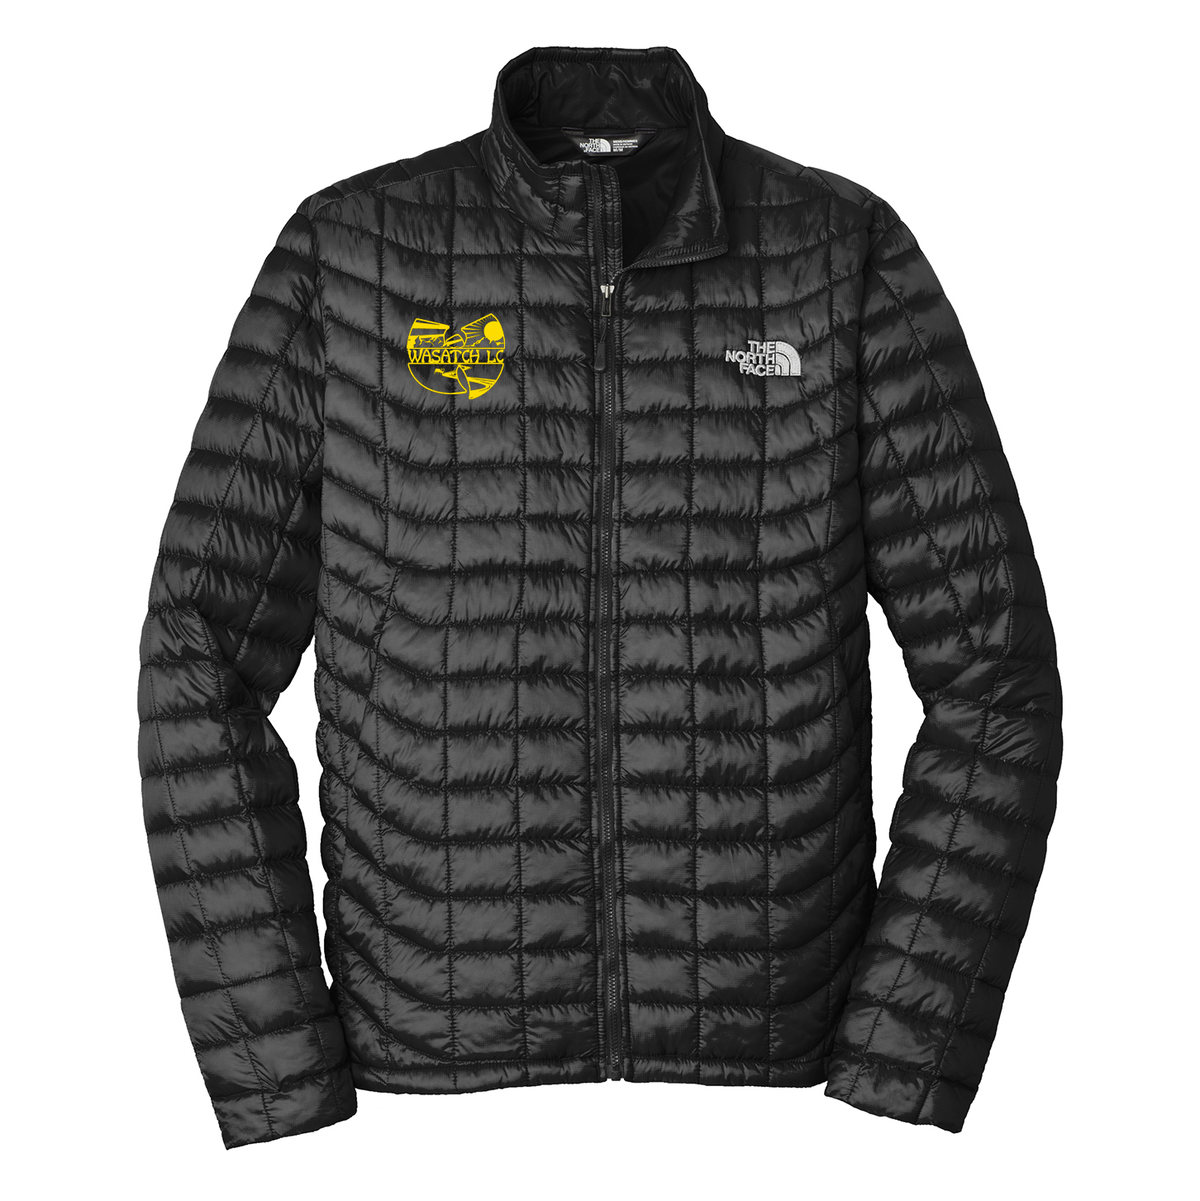 Wasatch LC The North Face ThermoBall Jacket